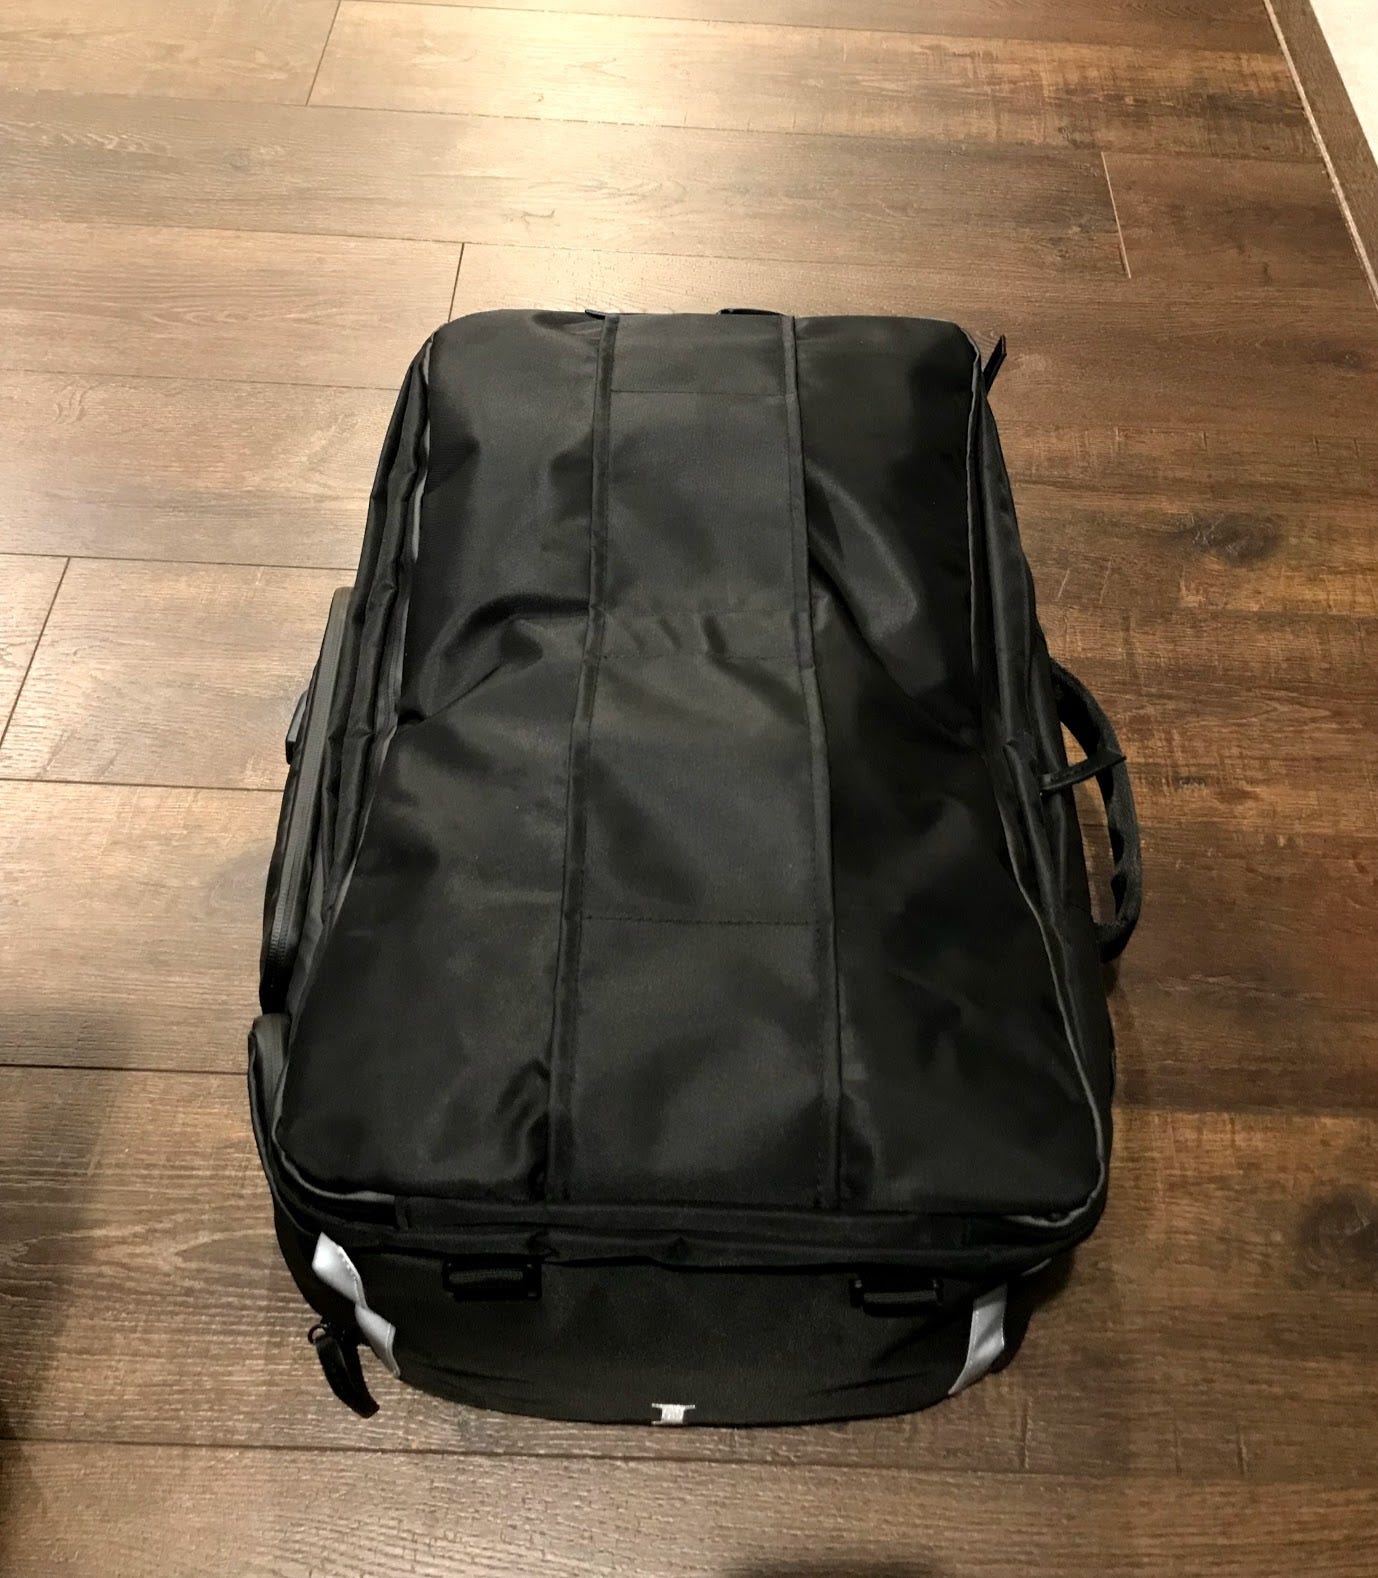 Instinct Backpack Initial Review. A Travel Backpack and Packing System ...